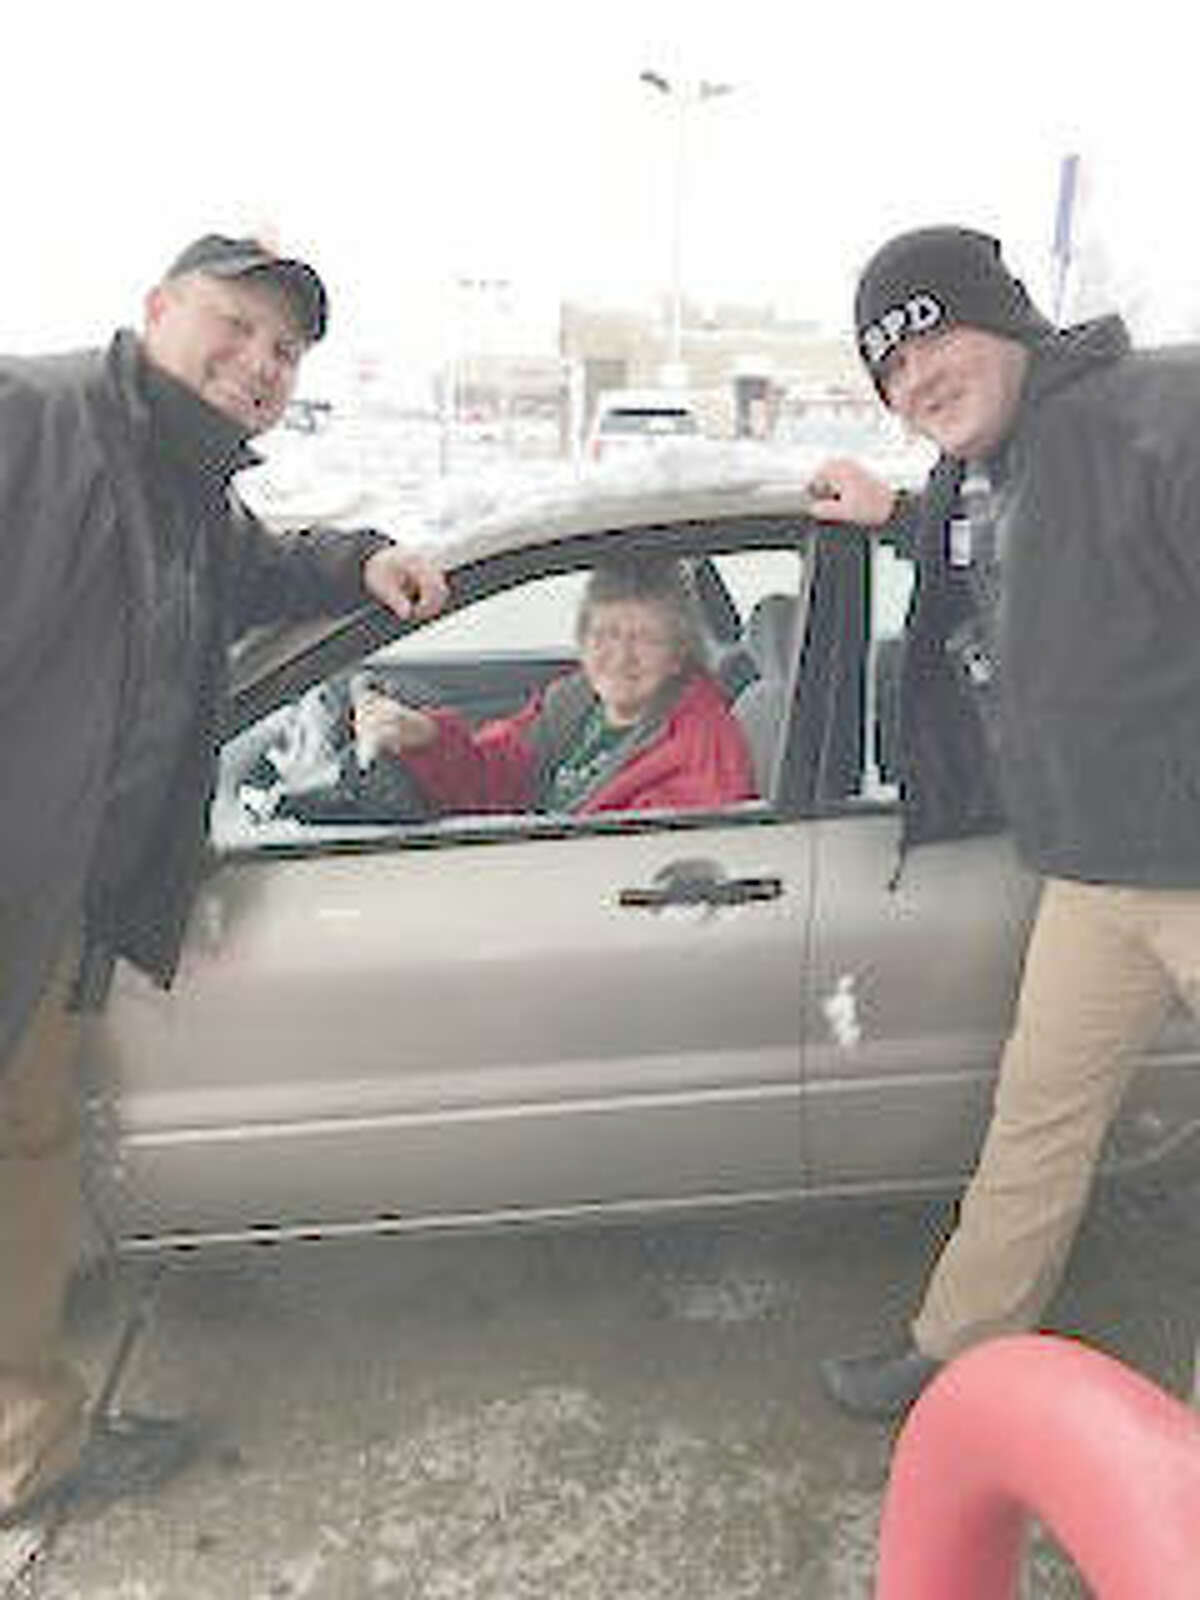 Bethalto Police Chief Greg Smock, left, and another BPD officer pose with a happy recipient of $20 in free gasoline Dec. 23 at the Hit-N-Run in Bethalto, compliments of Mustache March 4PD.